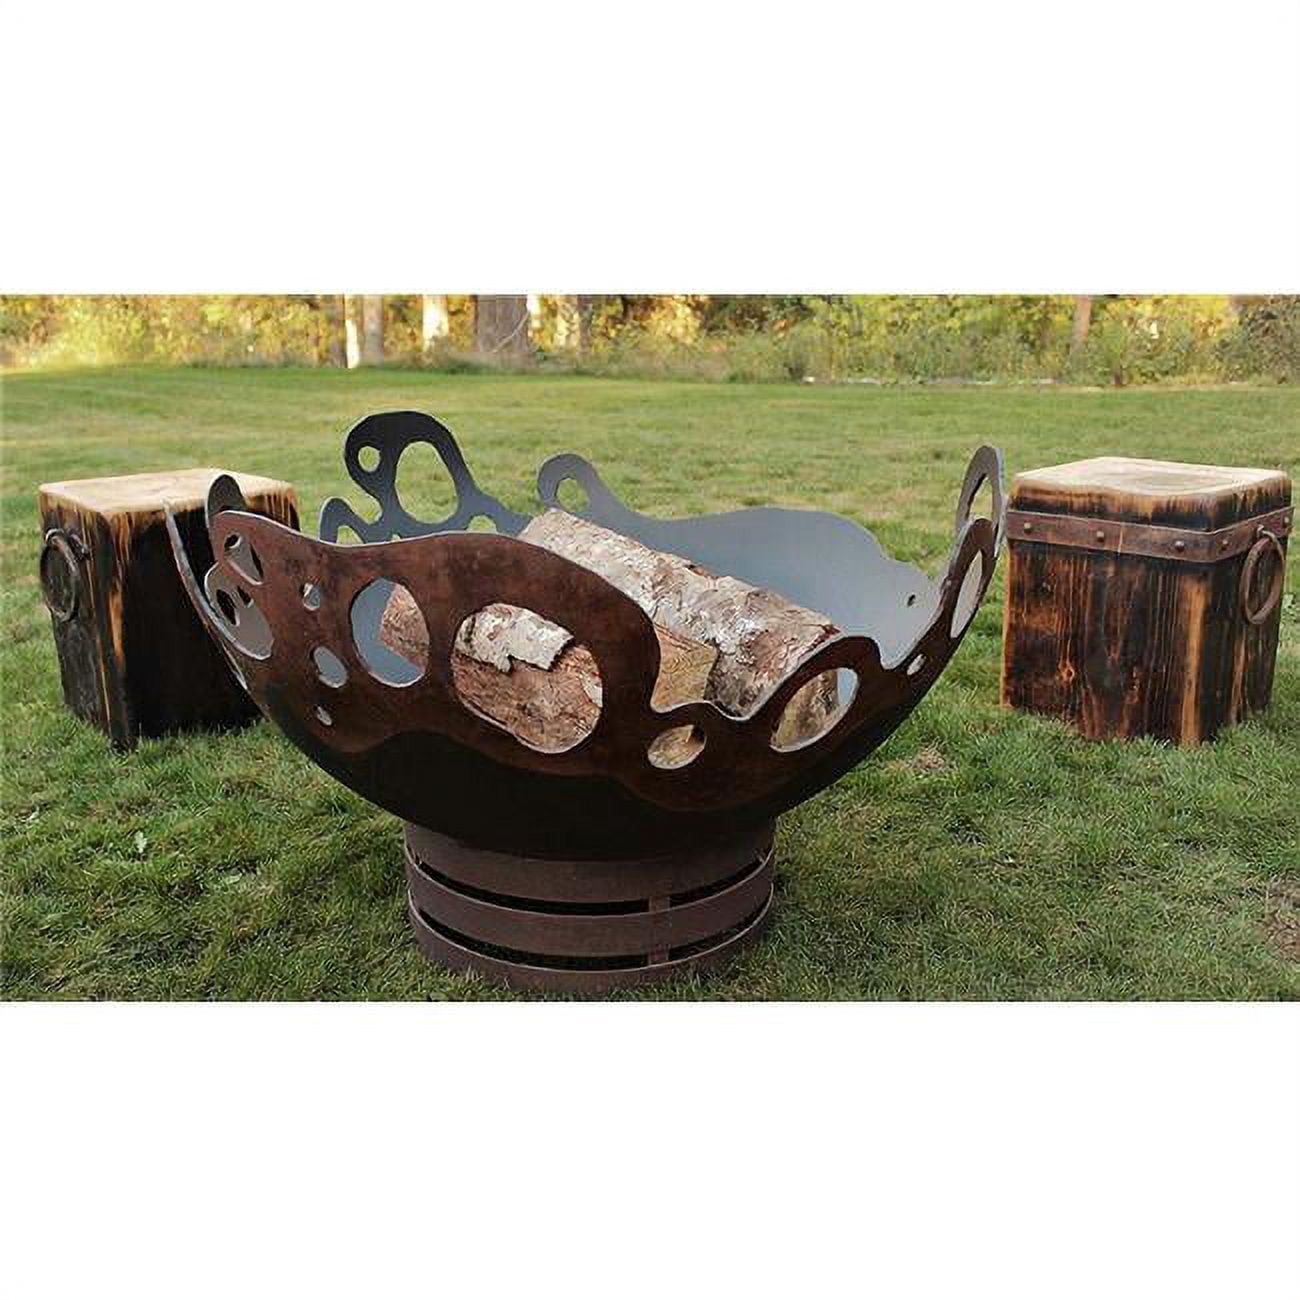 20008-ngei Riptide Natural Gas Electronic Ignition Fire Pit